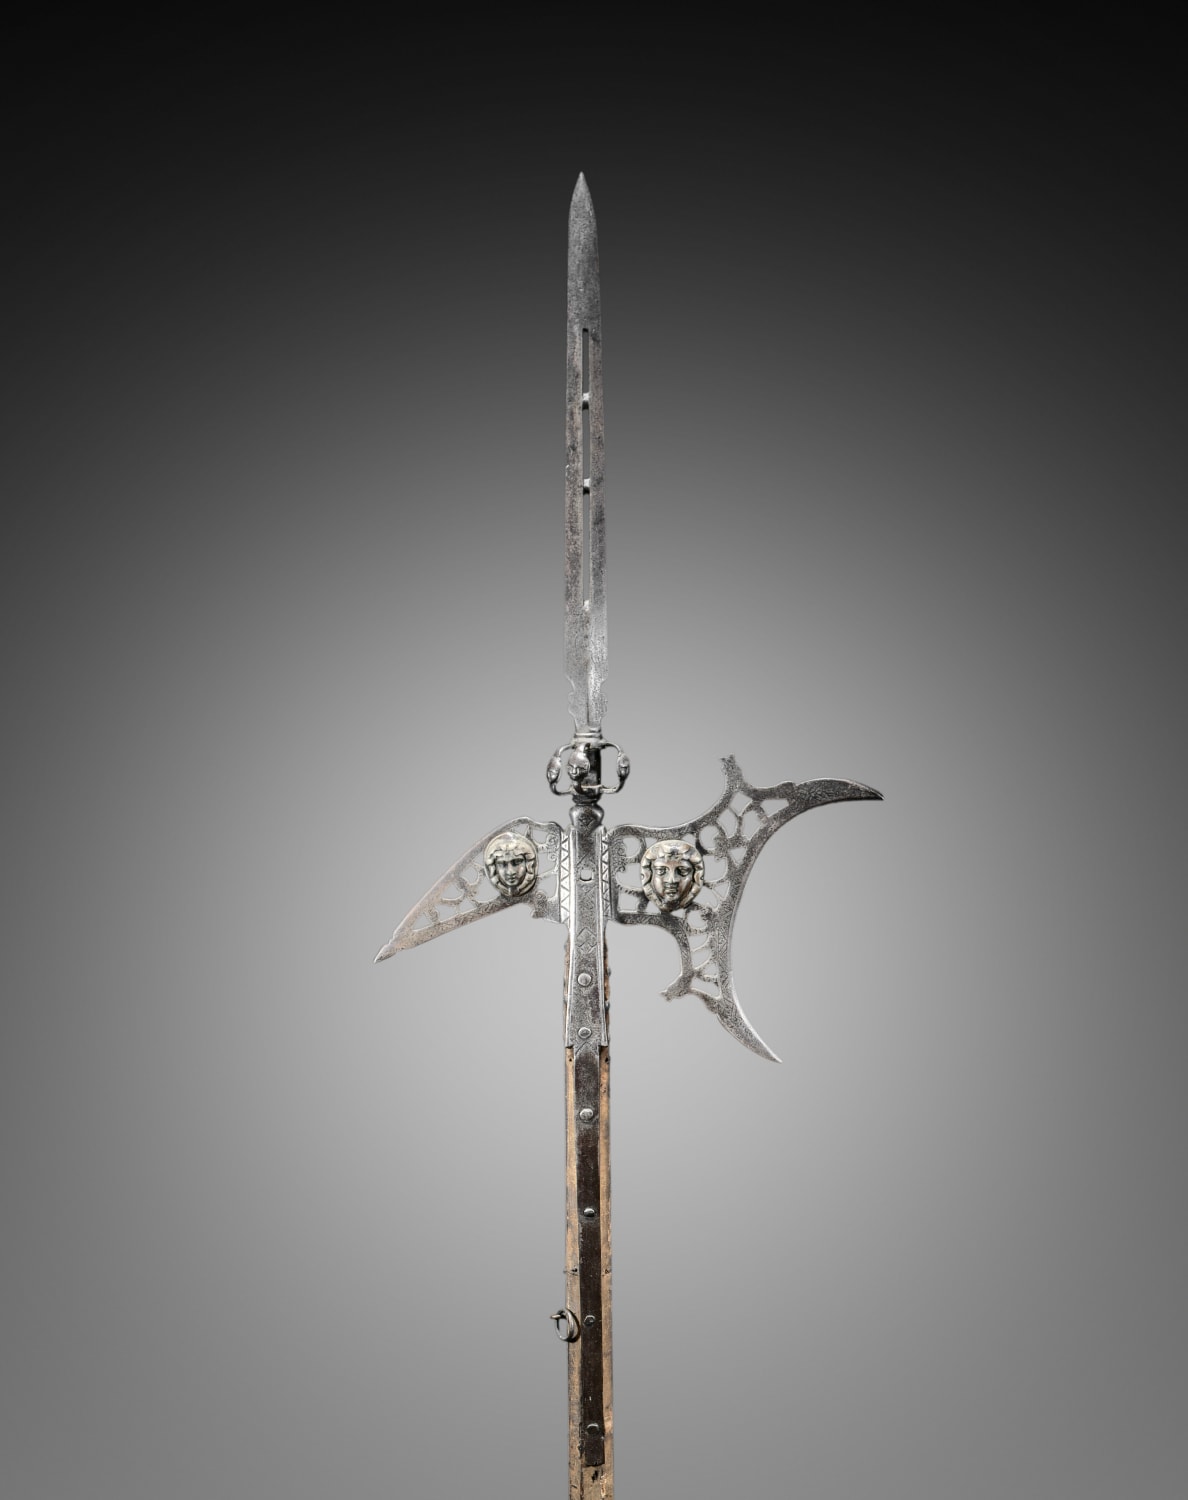 Halberd decorated with appliqué masks in brass, France, early 17th century